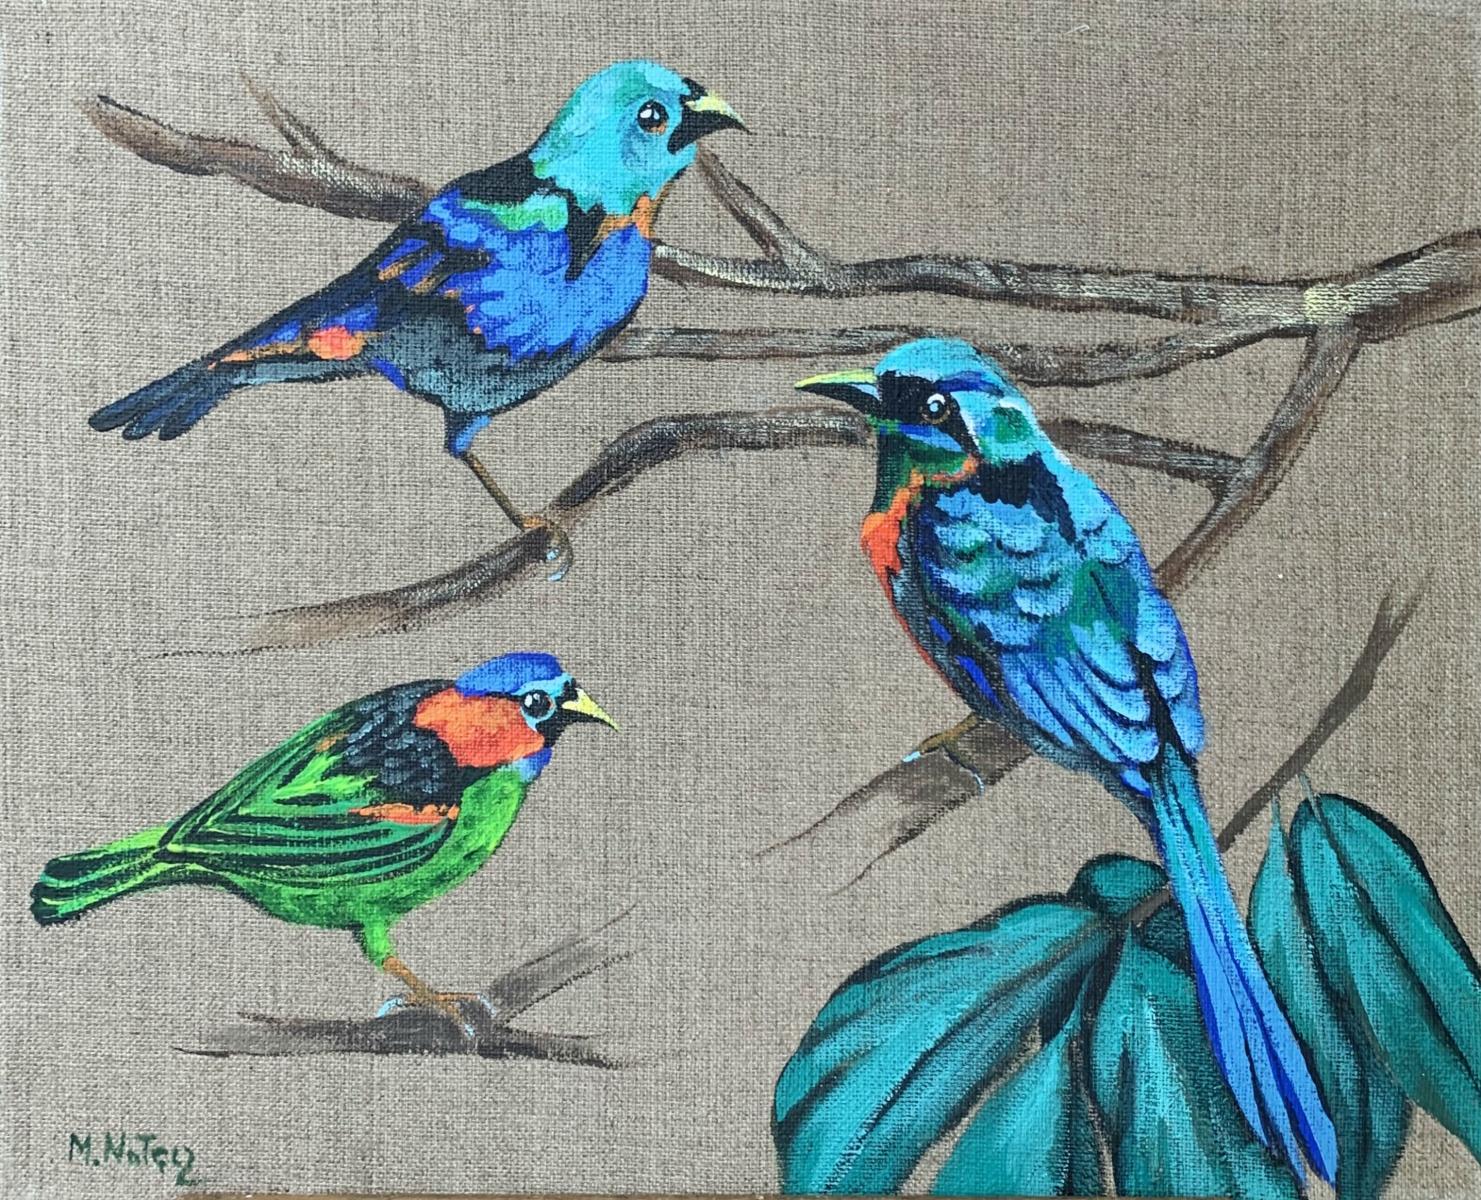 Gardens of delight 12 - Figurative painting, Birds, Realistic, Vibrant colors